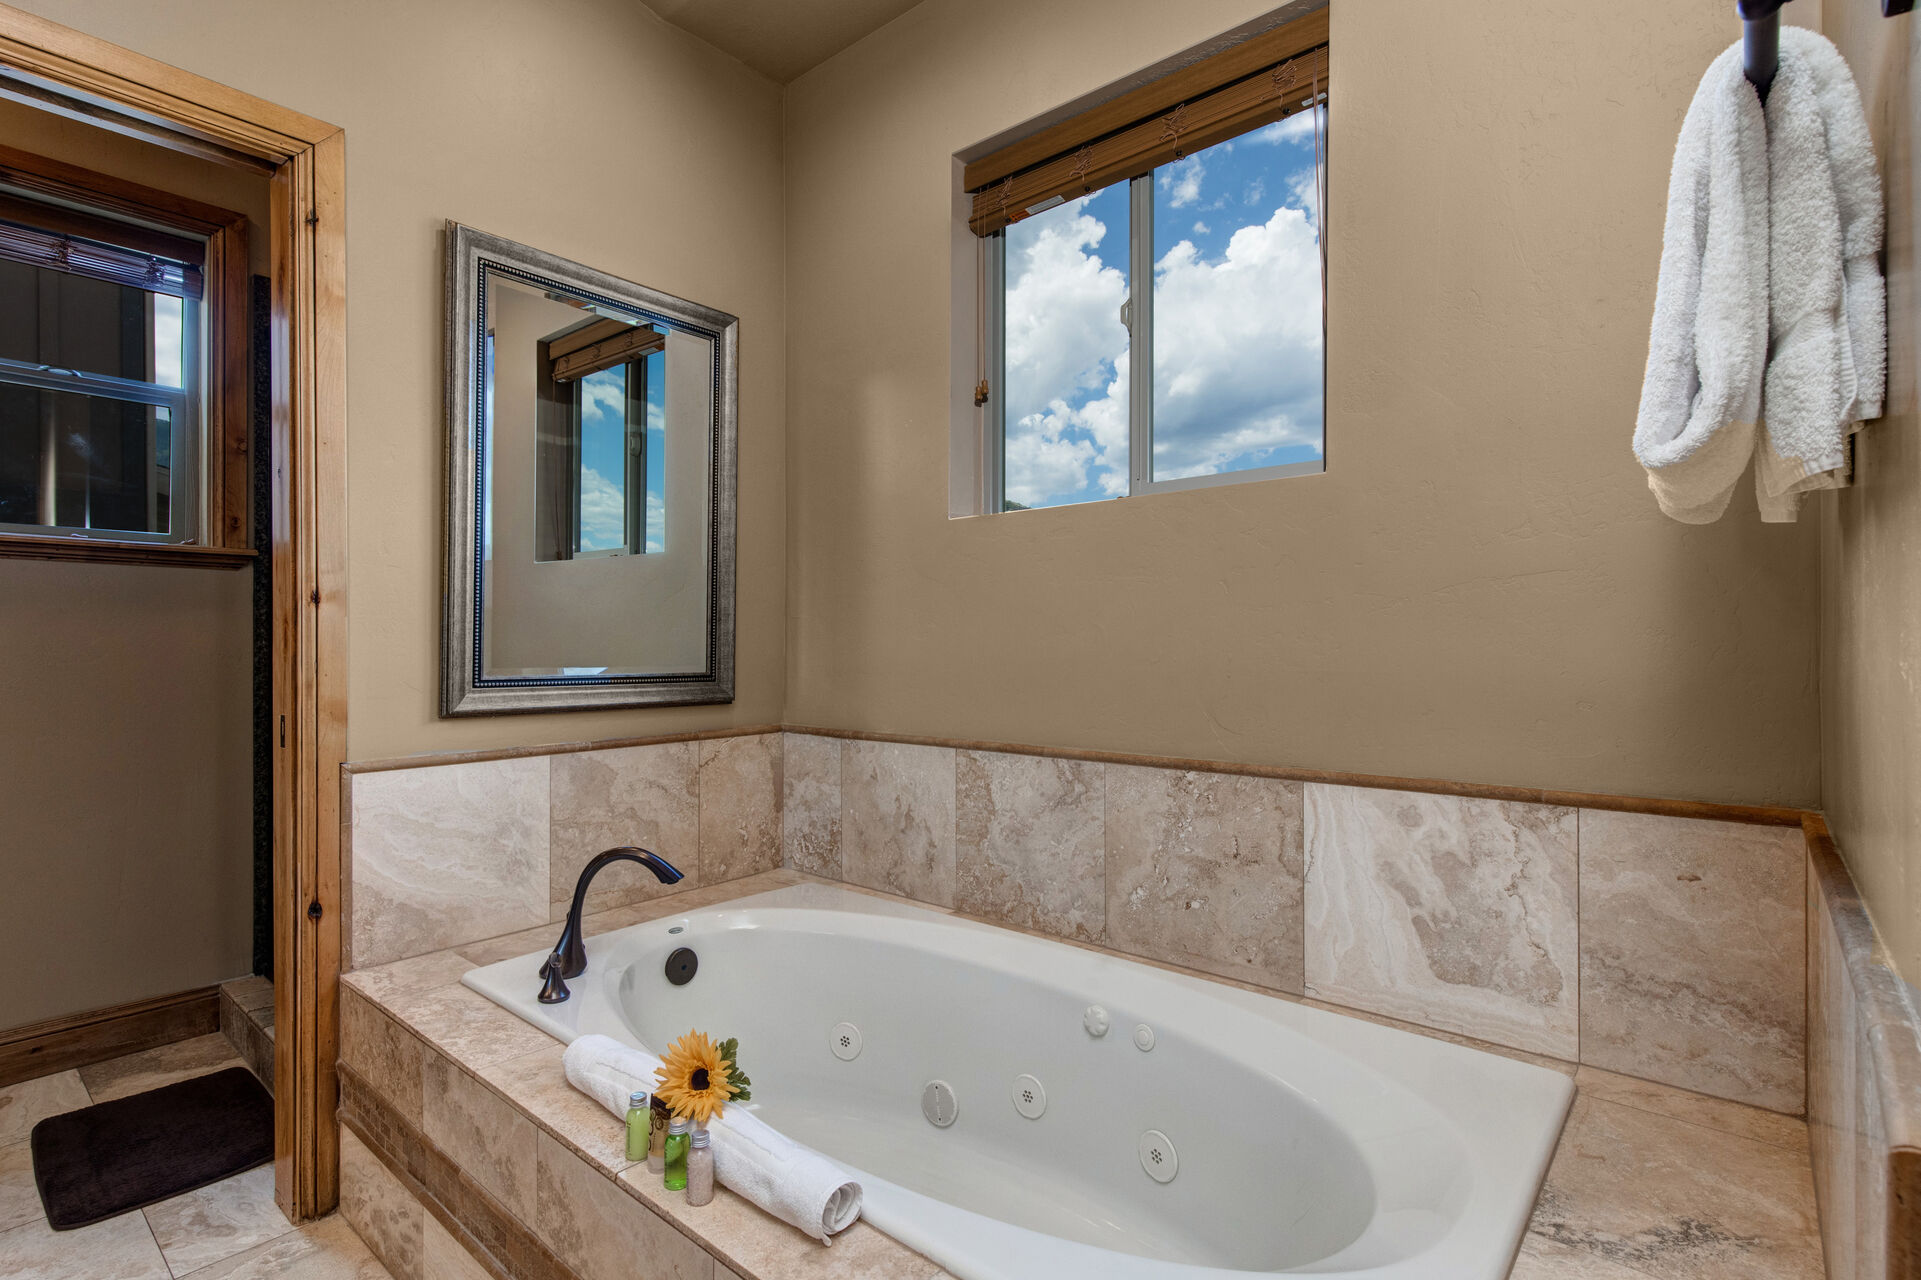 Master Bathroom with dual vanities, jetted soaking tub, and large glass and tile shower